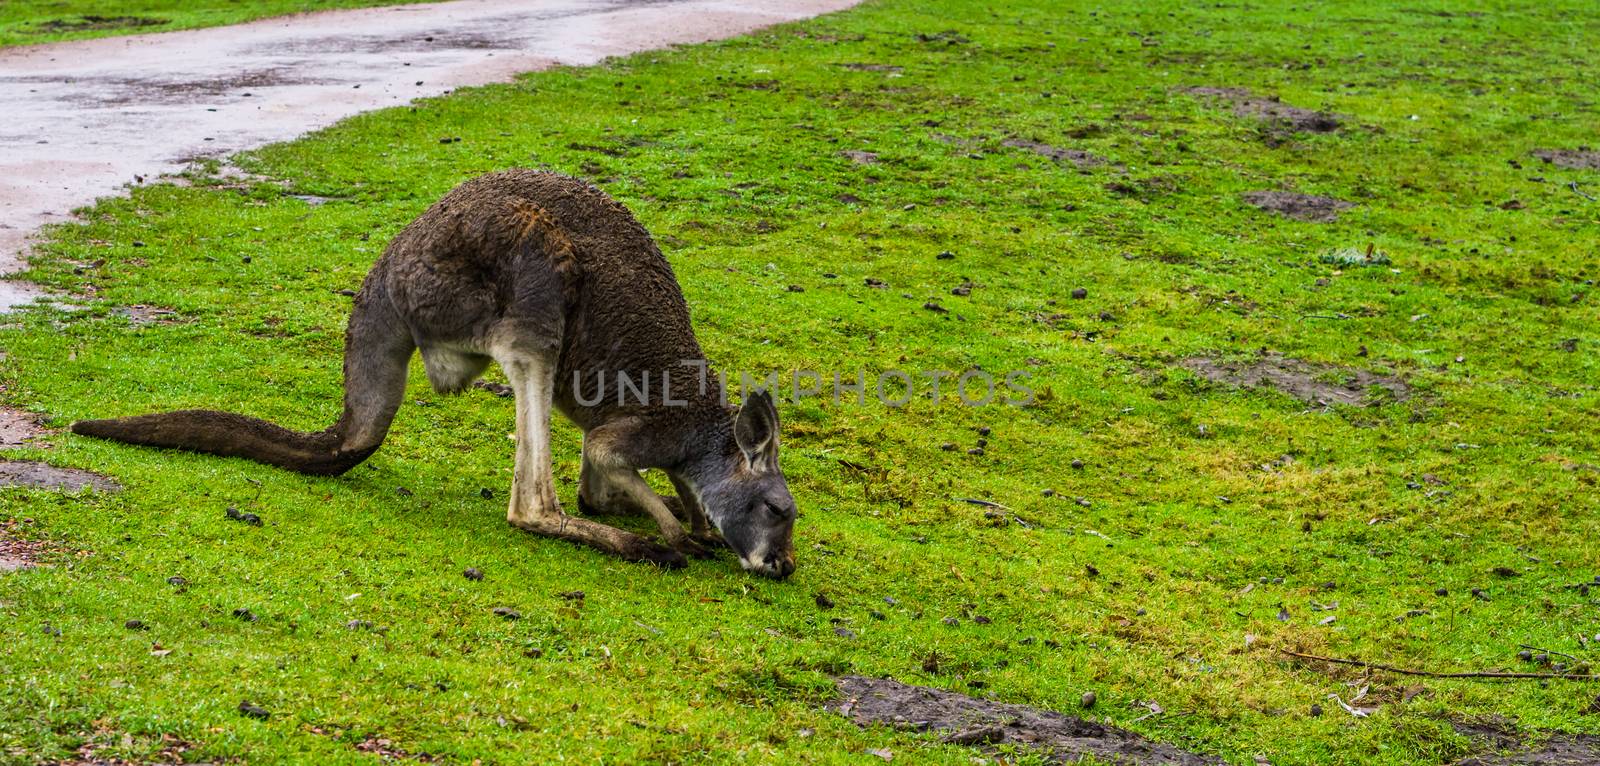 red necked wallaby grazing in the grass, Kangaroo from australia